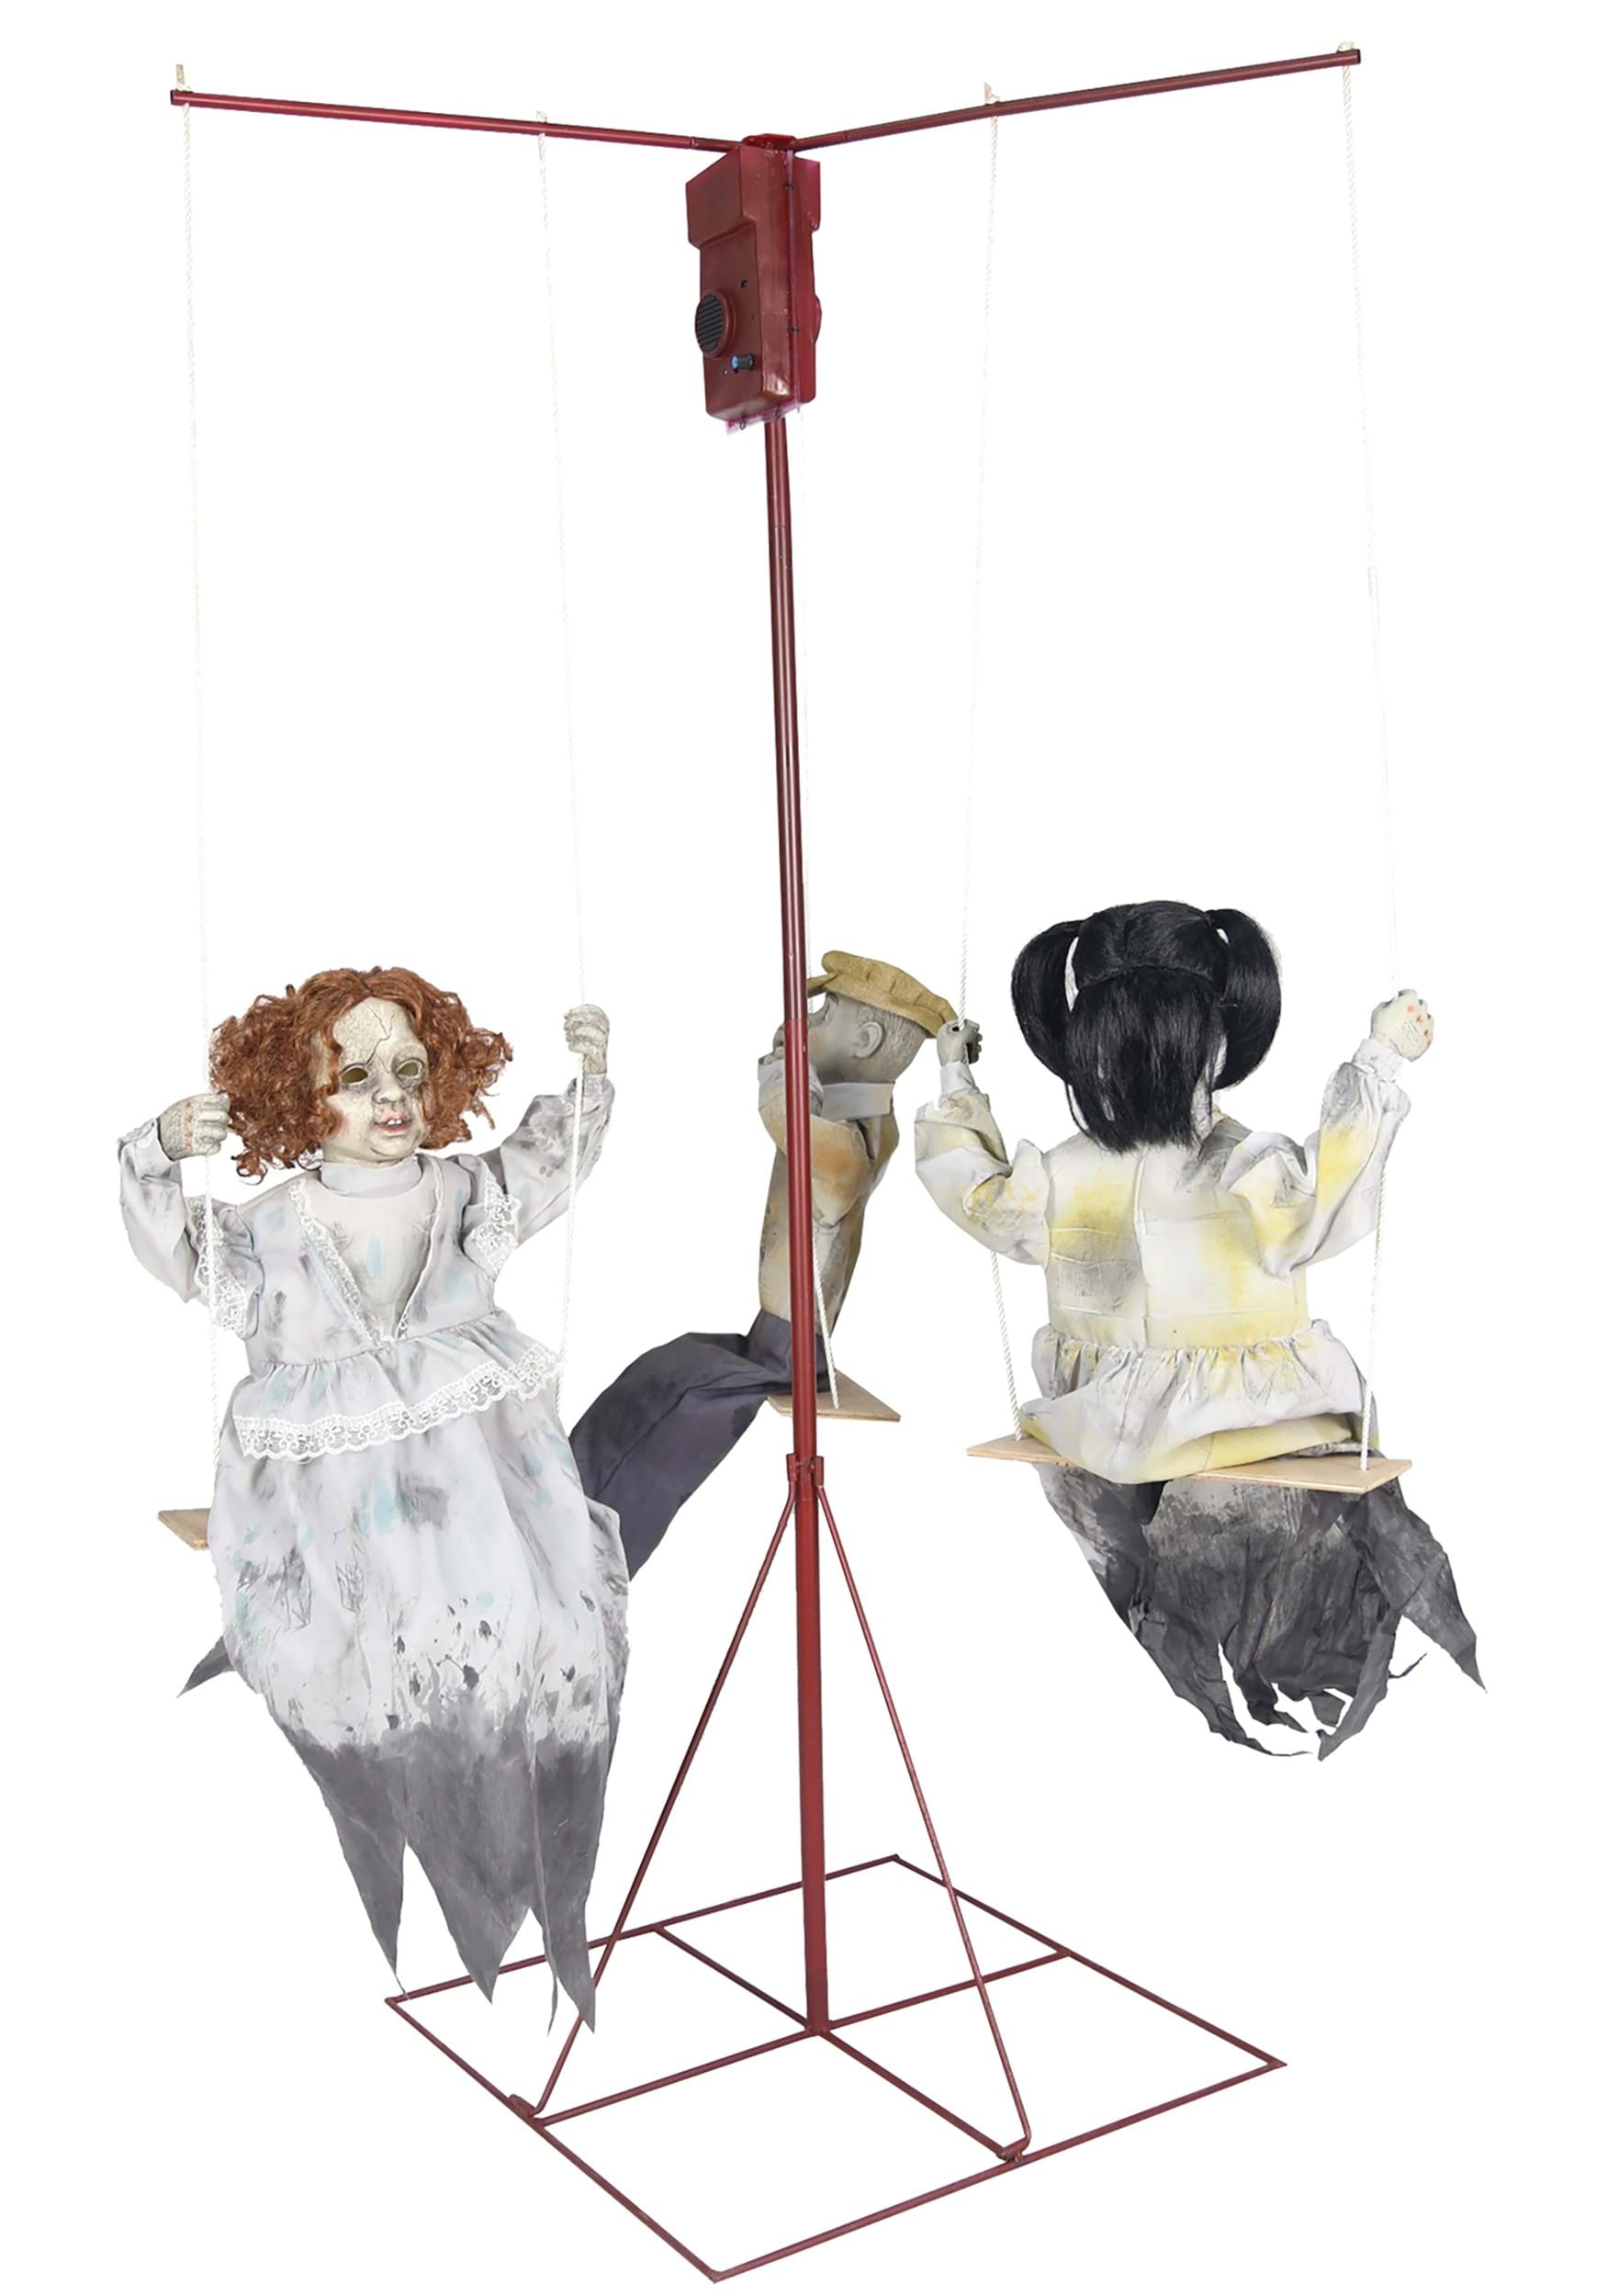 Image of 72" Ghostly Go Round with 3 Dolls Animated Halloween Prop ID MOMR124448-ST